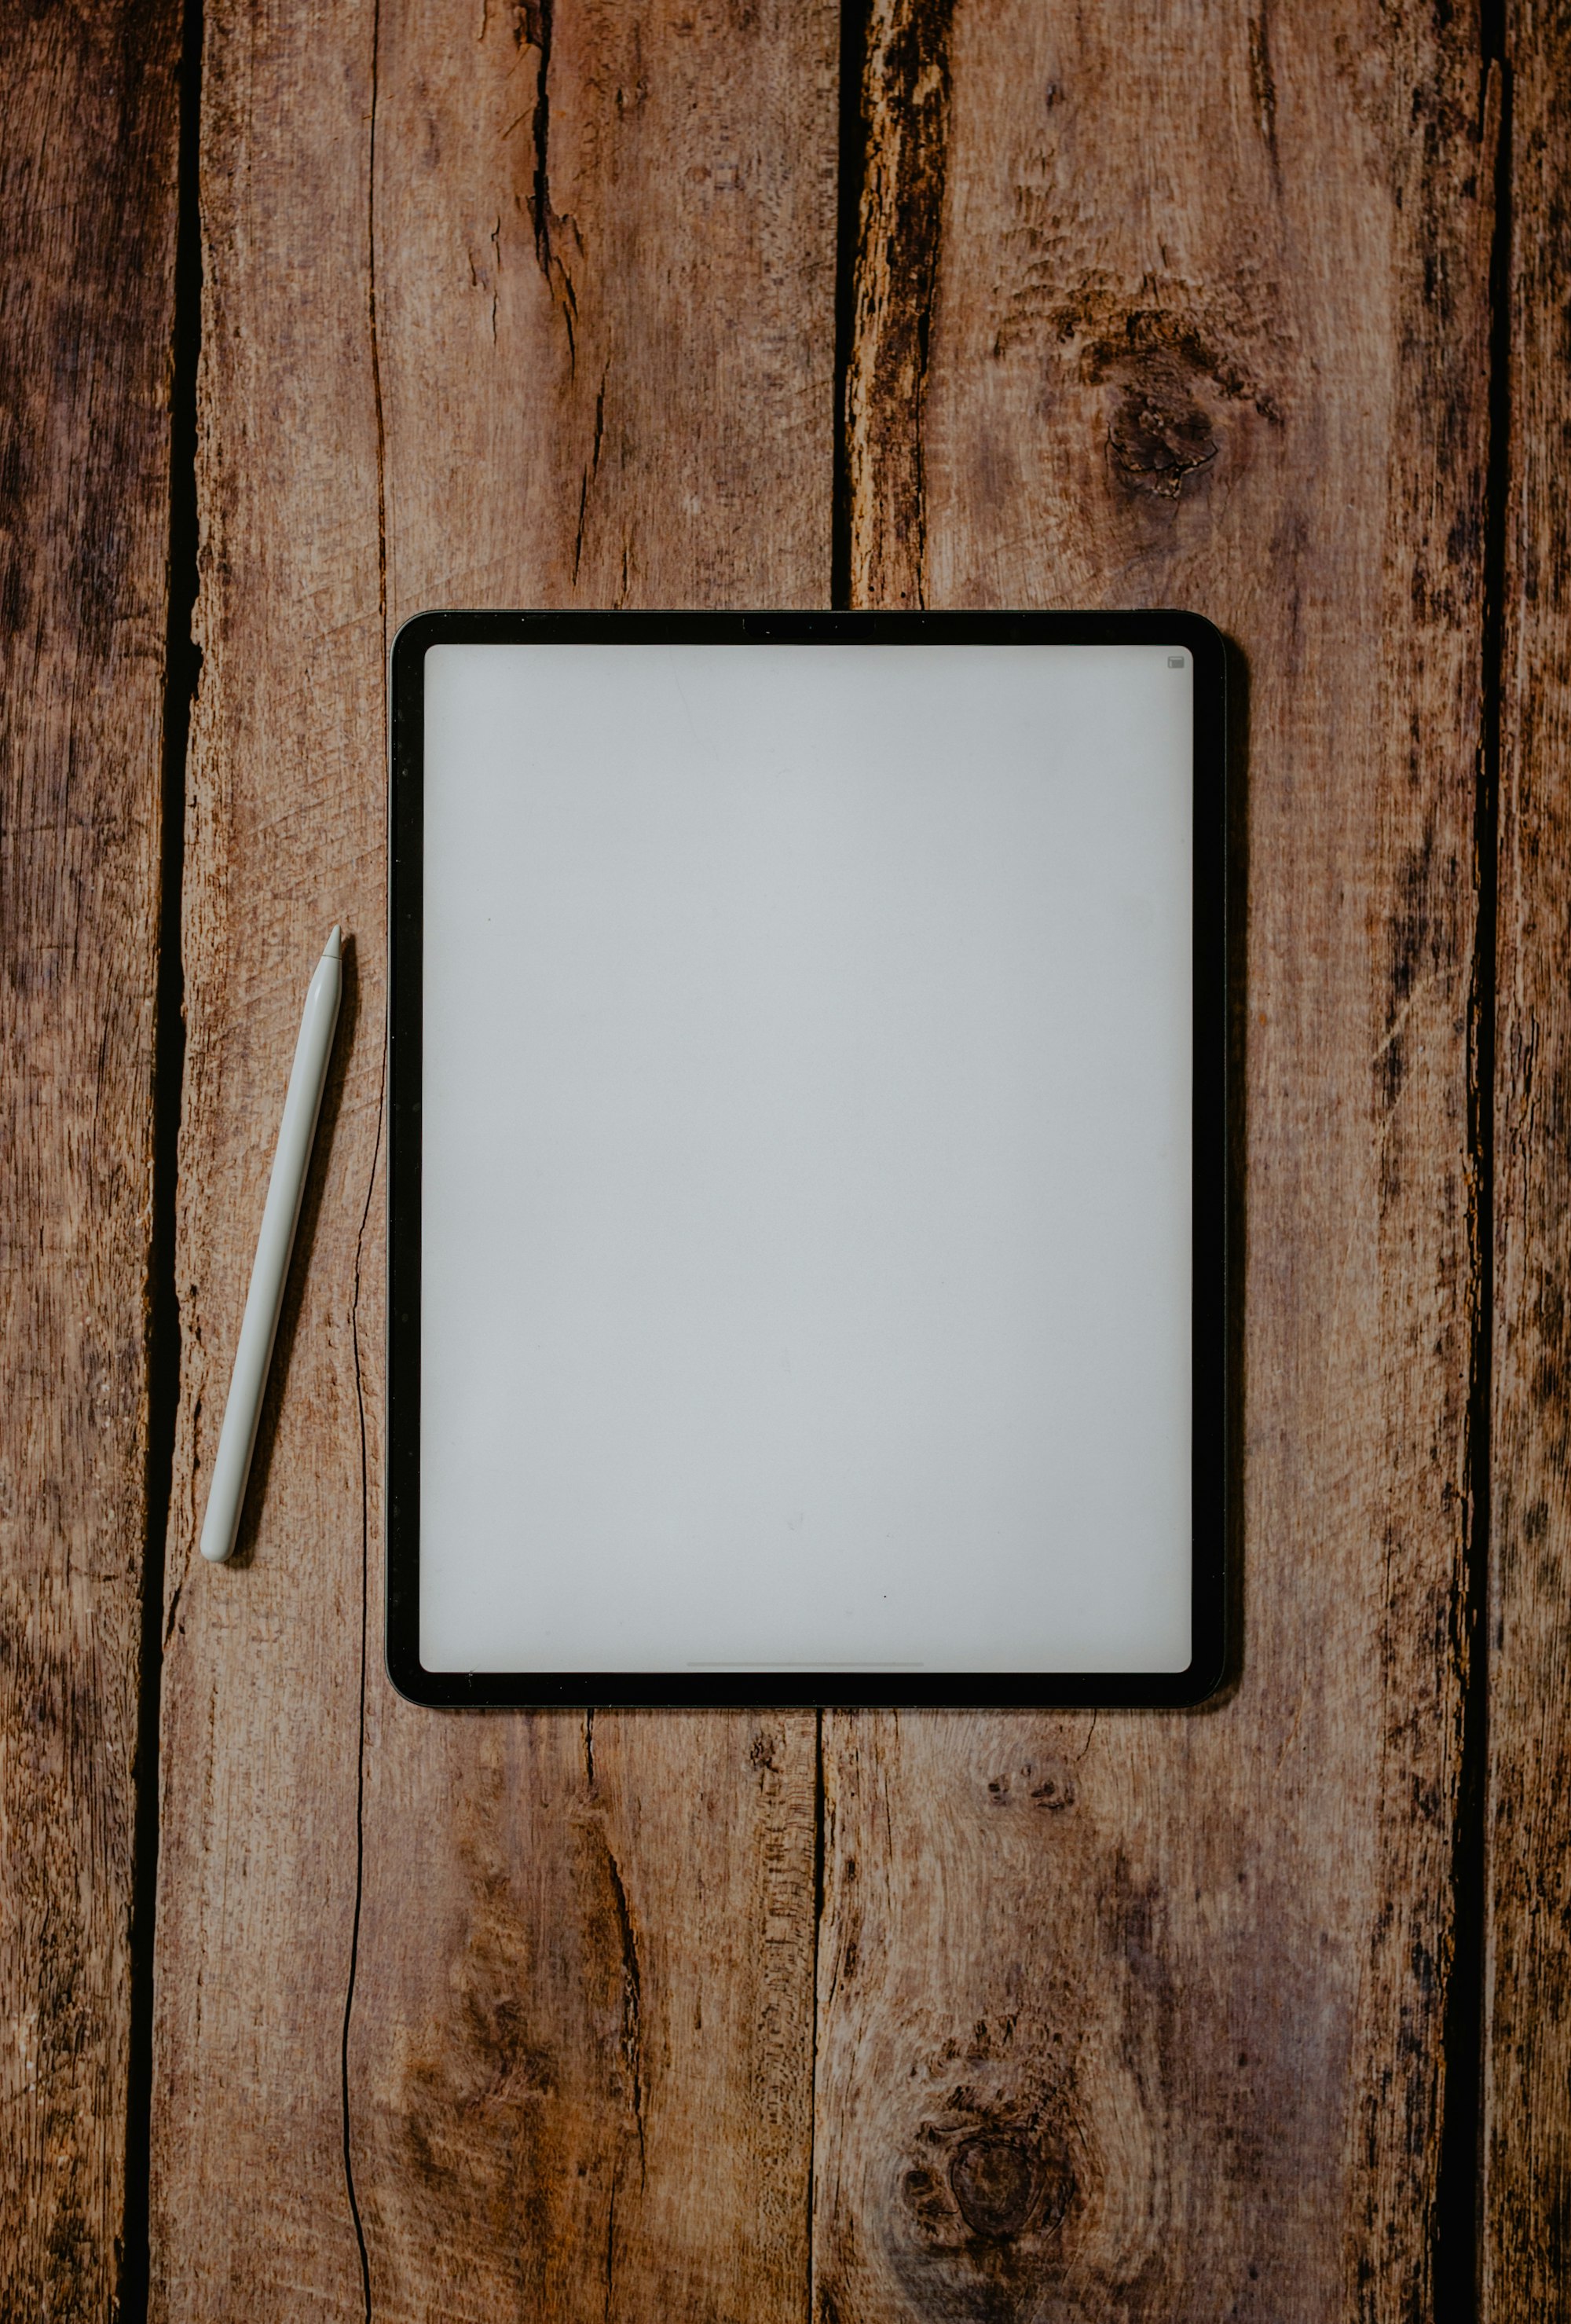 iPad pro with apple pencil and blank white screen